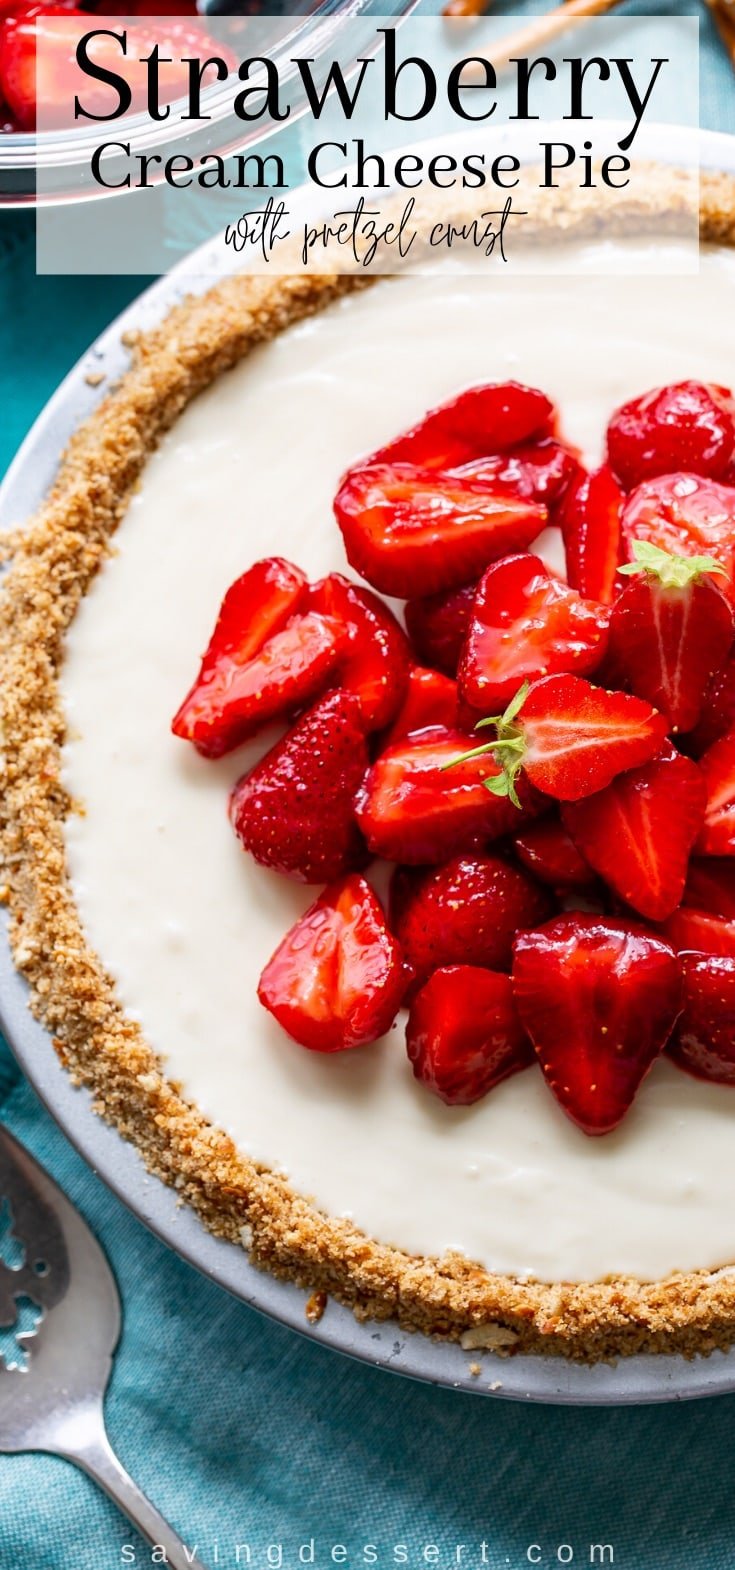 An overhead view of a whole cream cheese pie with pretzel crust, topped with red, ripe strawberries